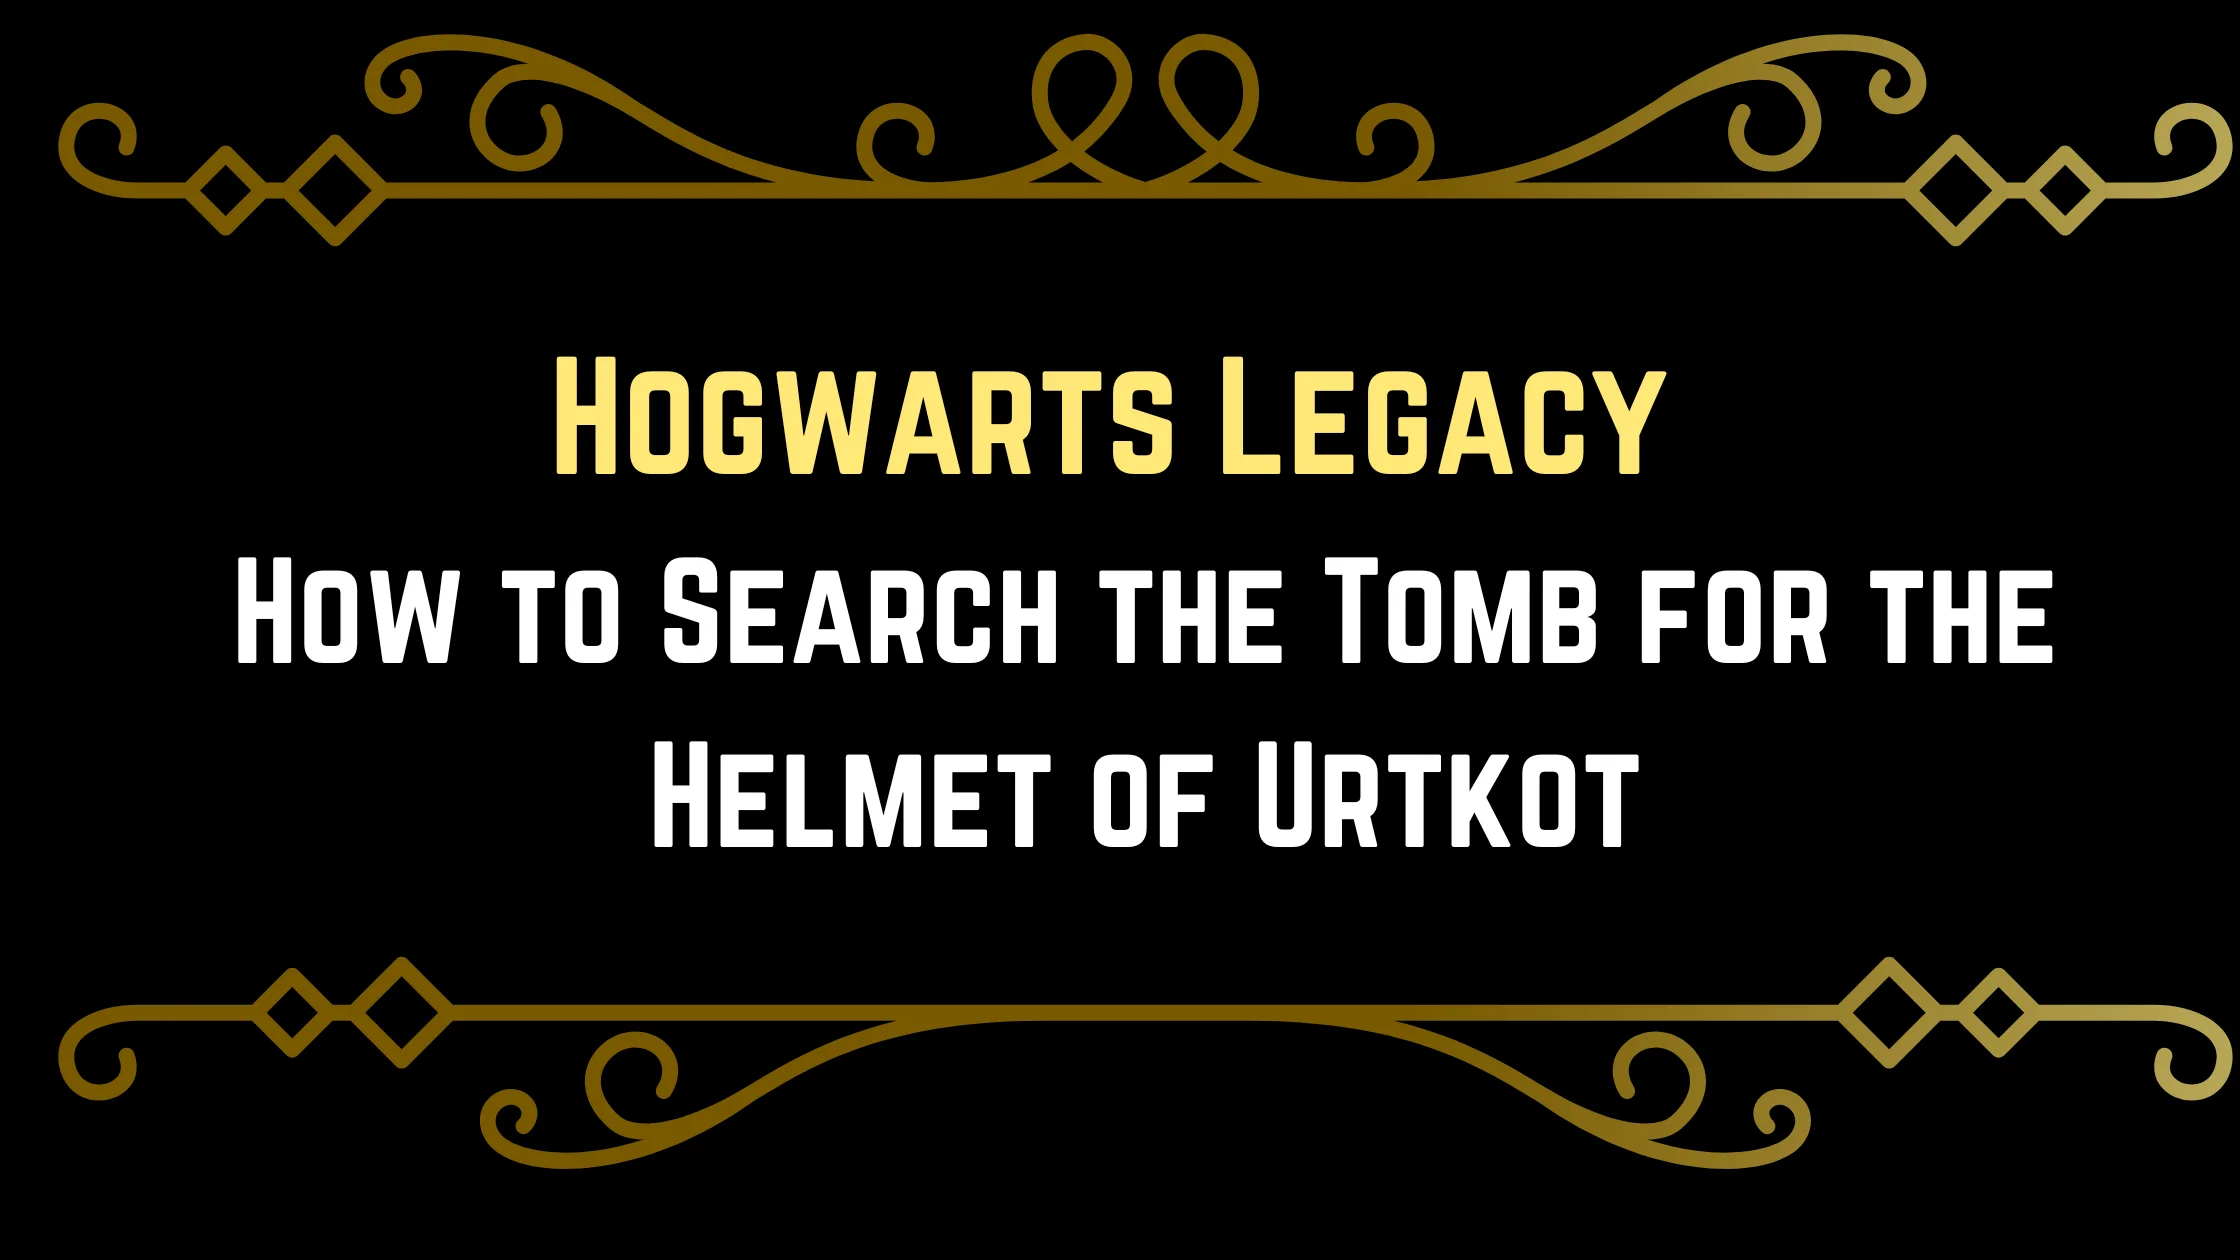 Hogwarts Legacy: How to Search the Tomb for the Helmet of Urtkot